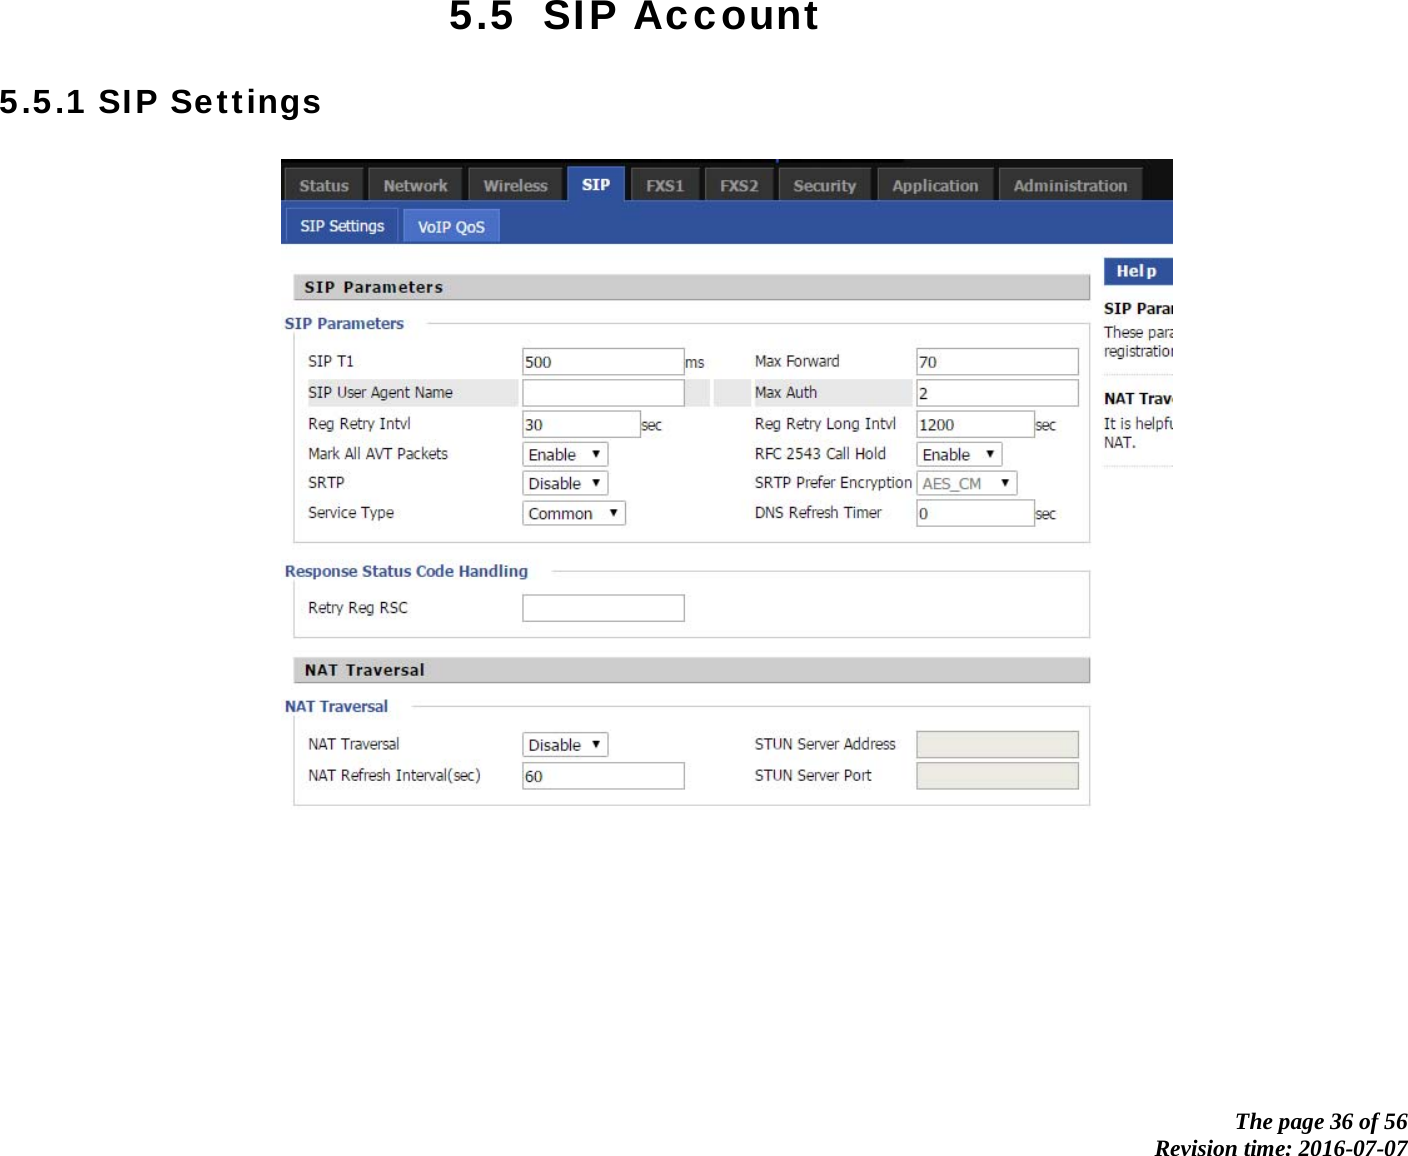            The page 36 of 56 Revision time: 2016-07-07       5.5 SIP Account 5.5.1 SIP Settings  